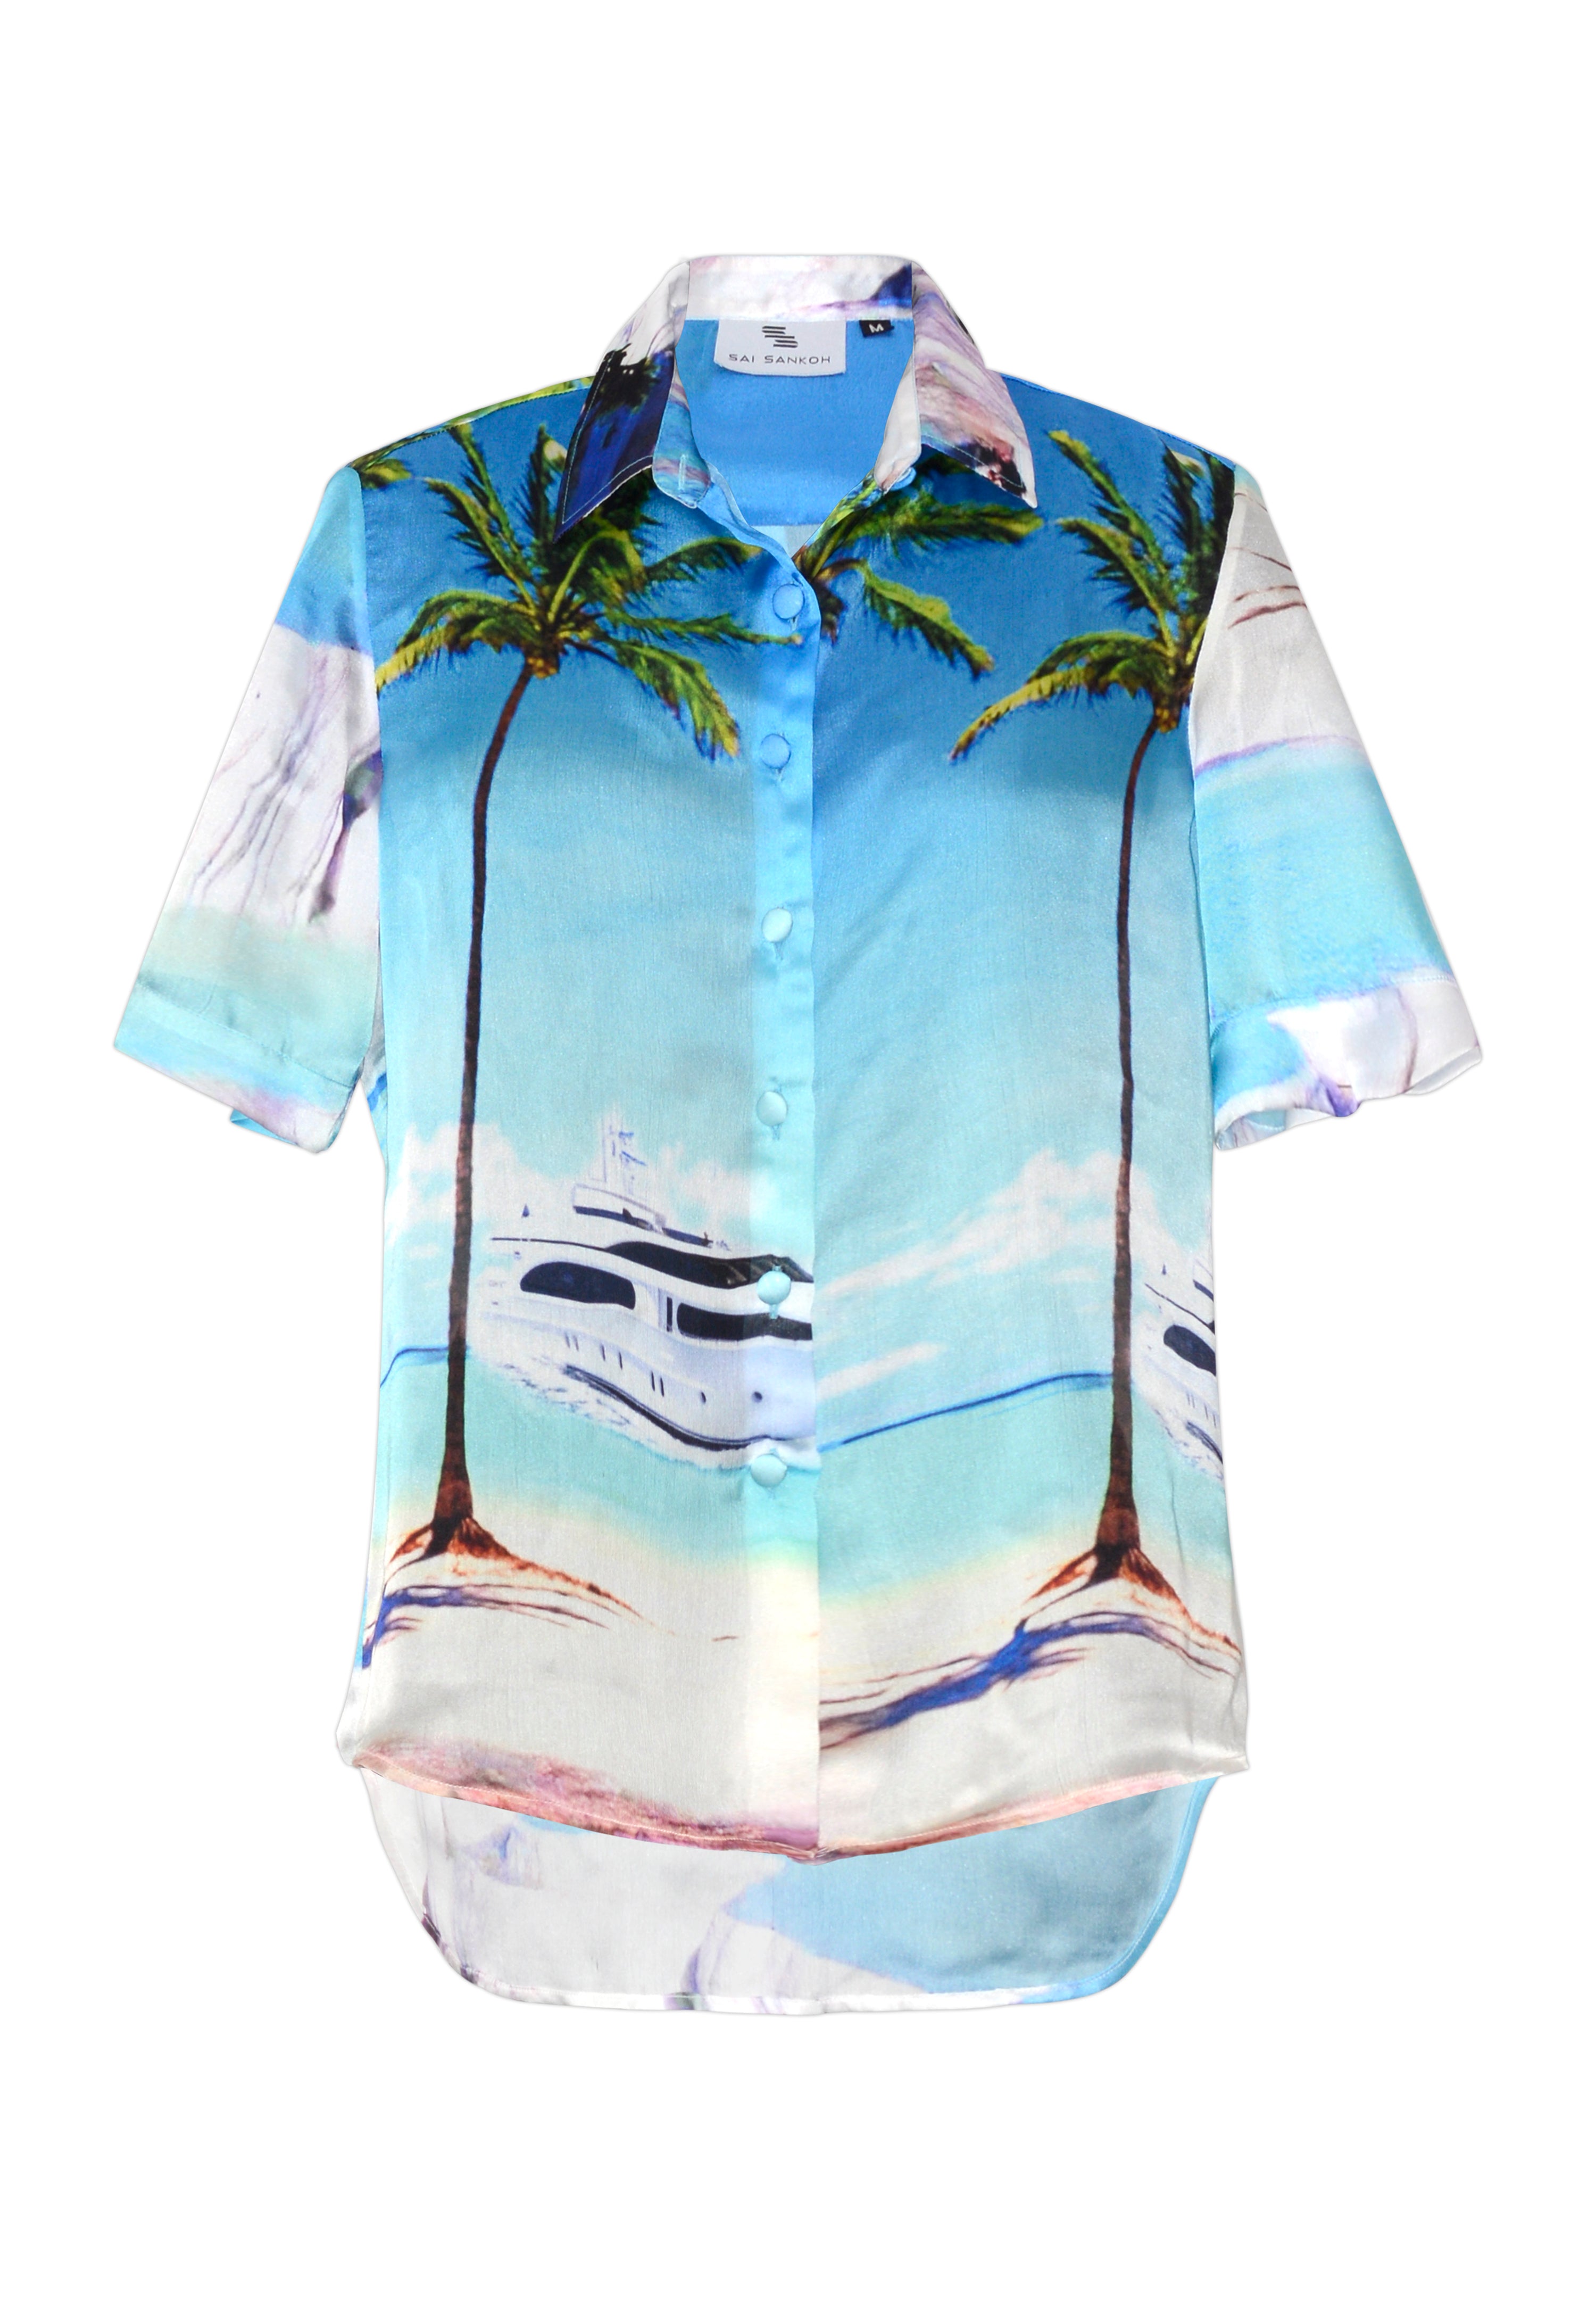 Don’t Go On Holiday Without One of These Vacation tops